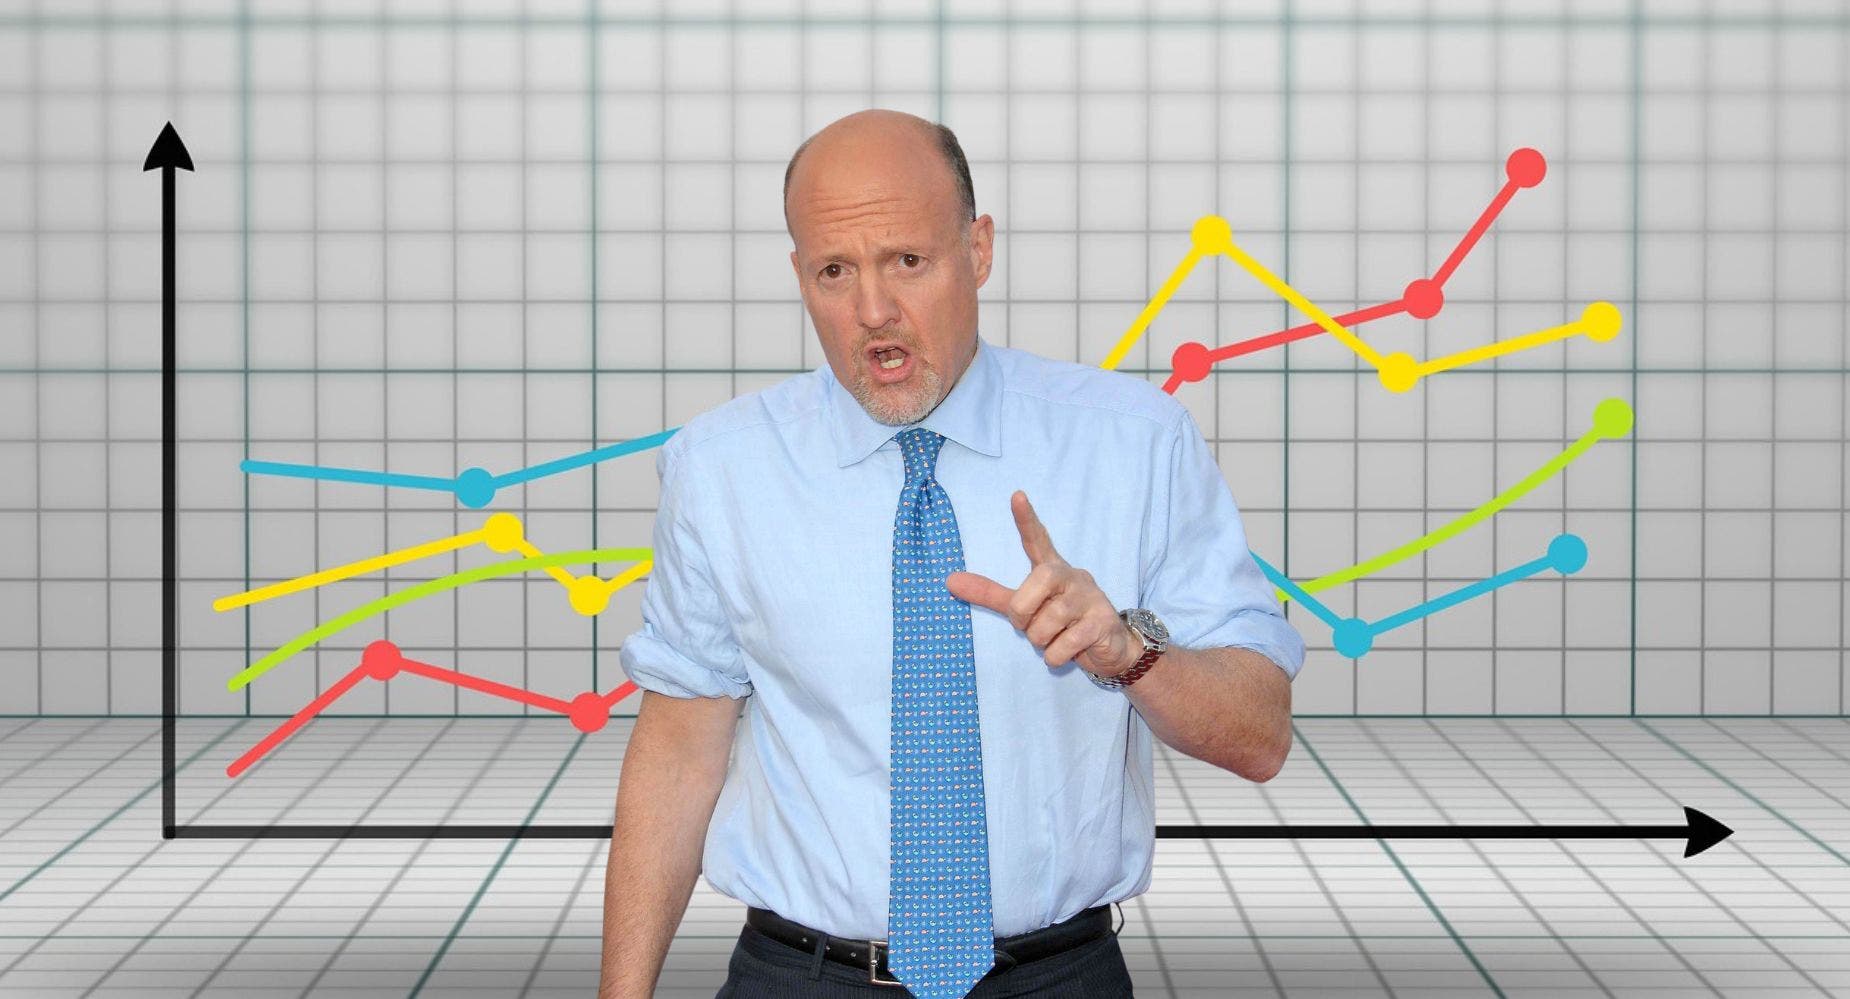 Jim Cramer Says This Is 'One Of Those Crazy Science Stocks That In This Market Will Work Perfectly'